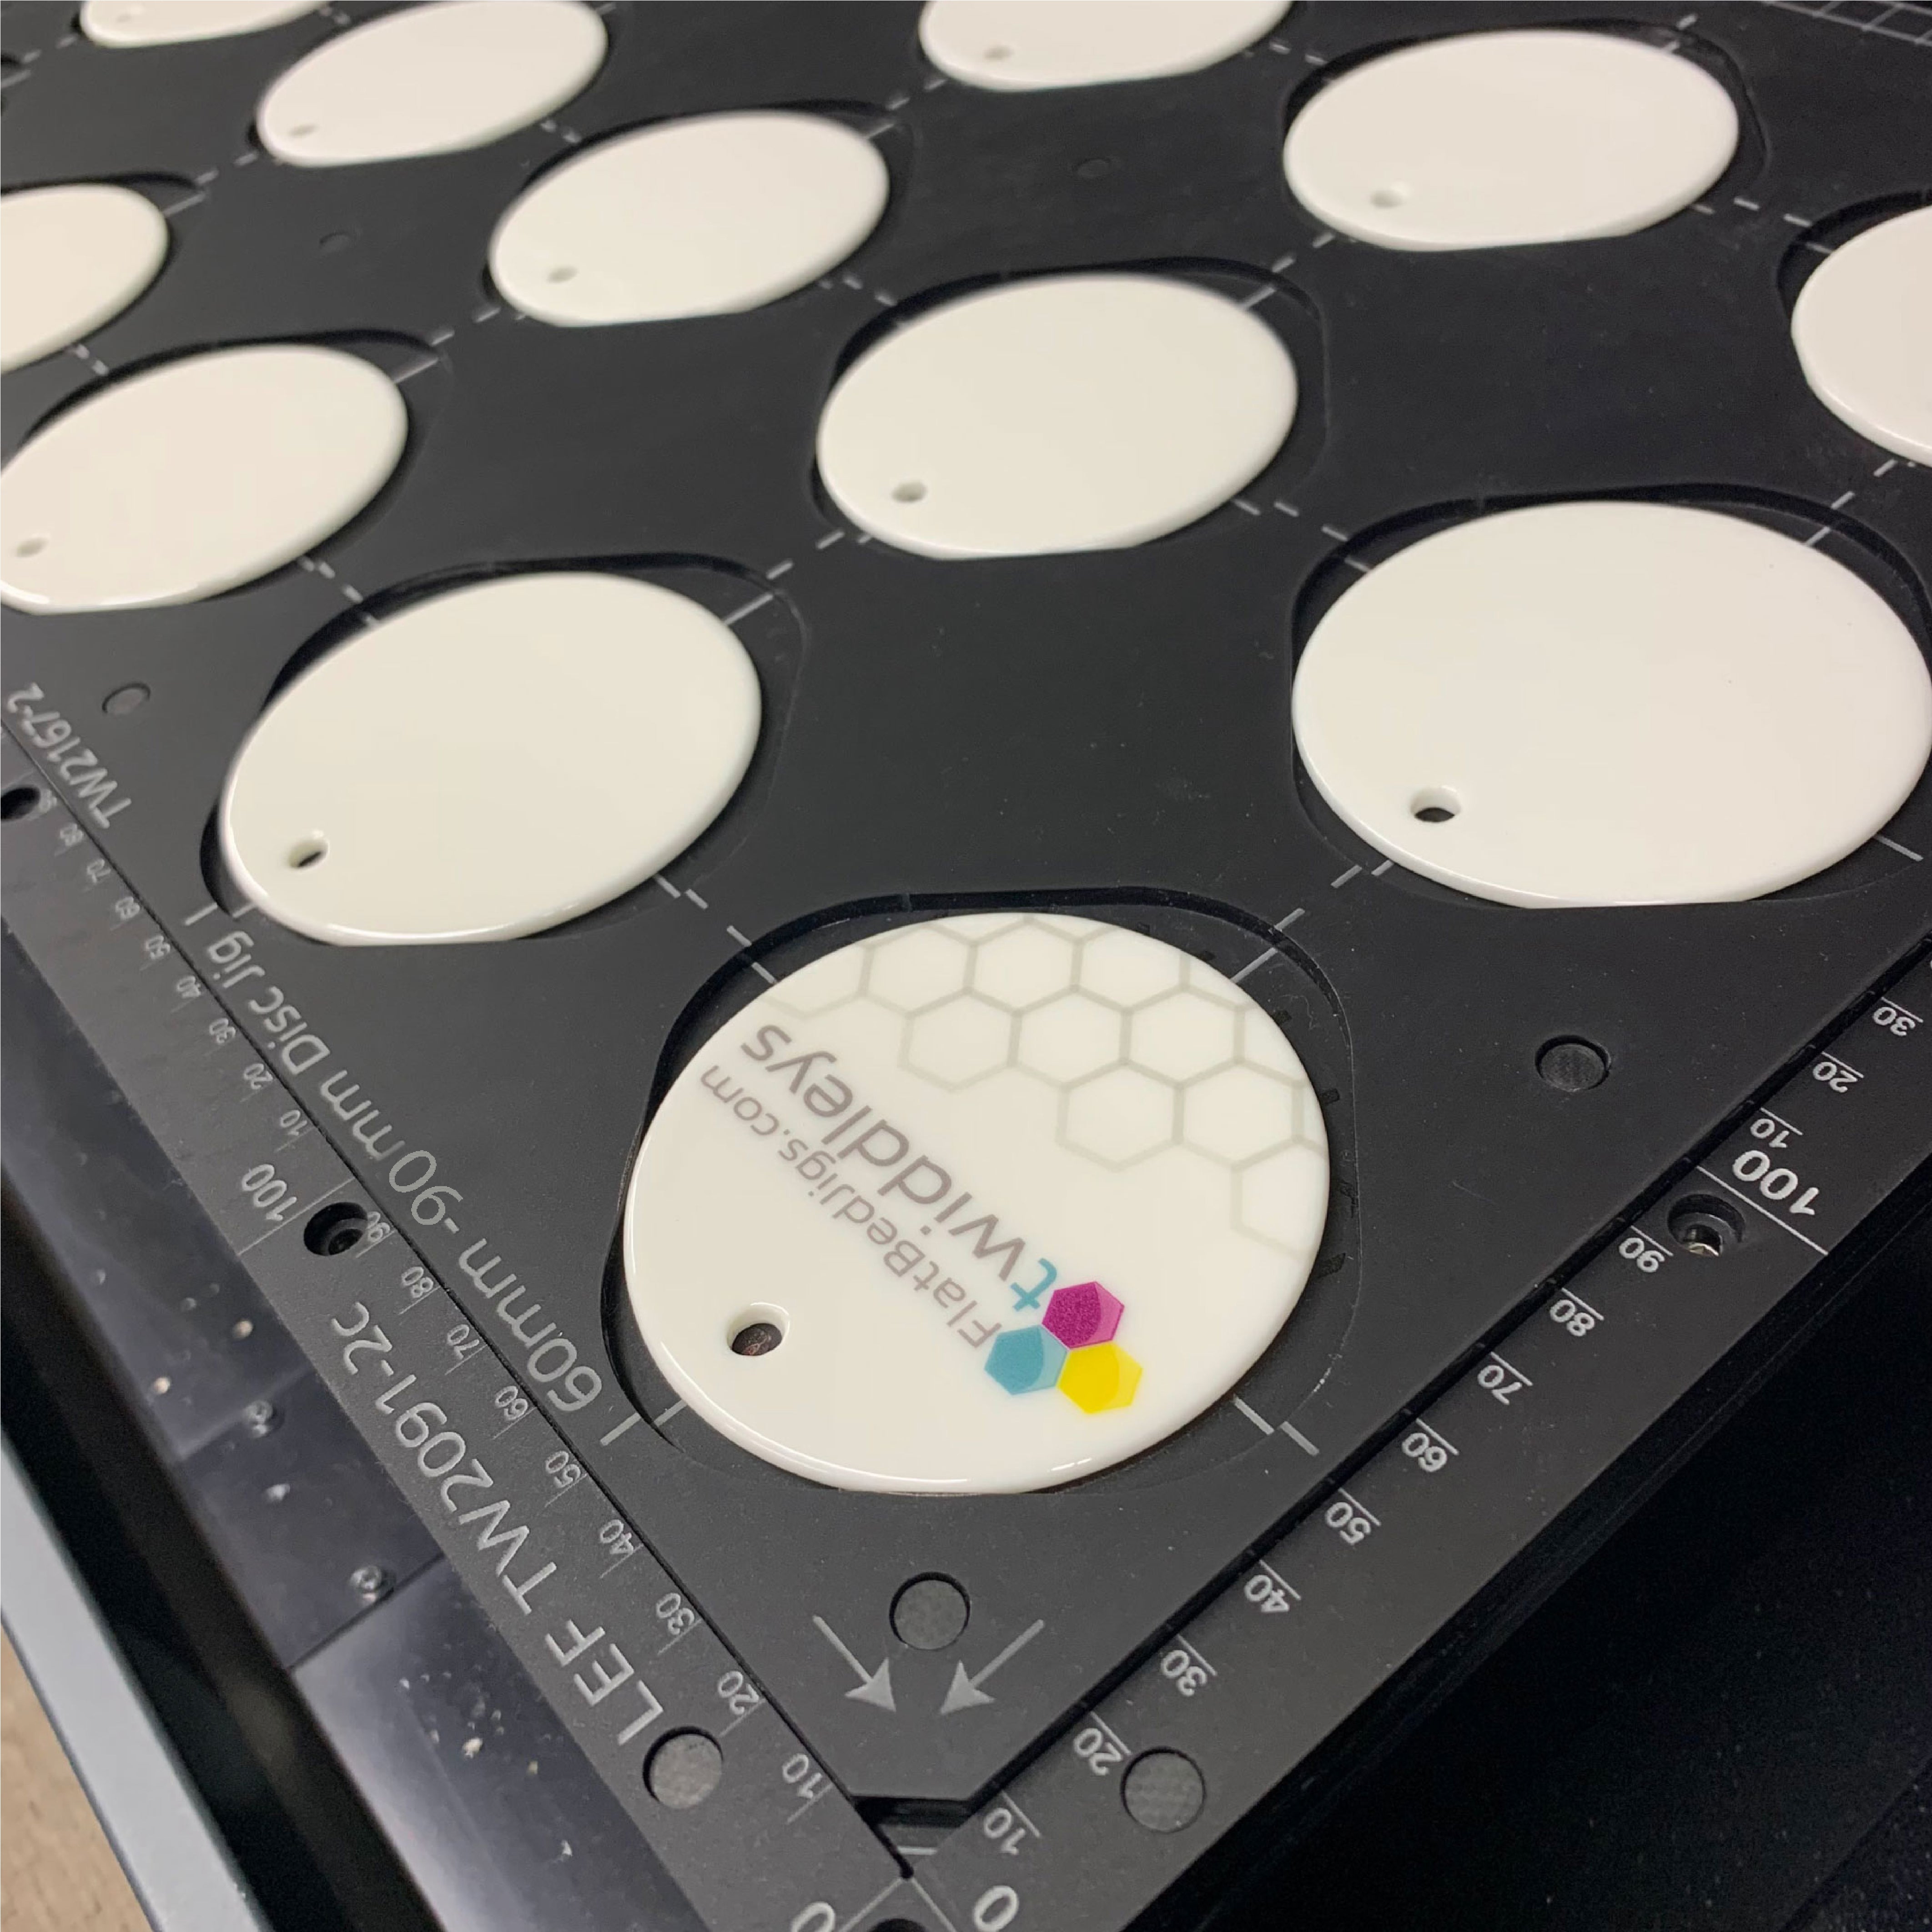 Ceramic Christmas Bauble Printing Jig for Roland BD-8 Flatbed Printer Series: 60mm - 90mm Circular Discs (2 Spaces)